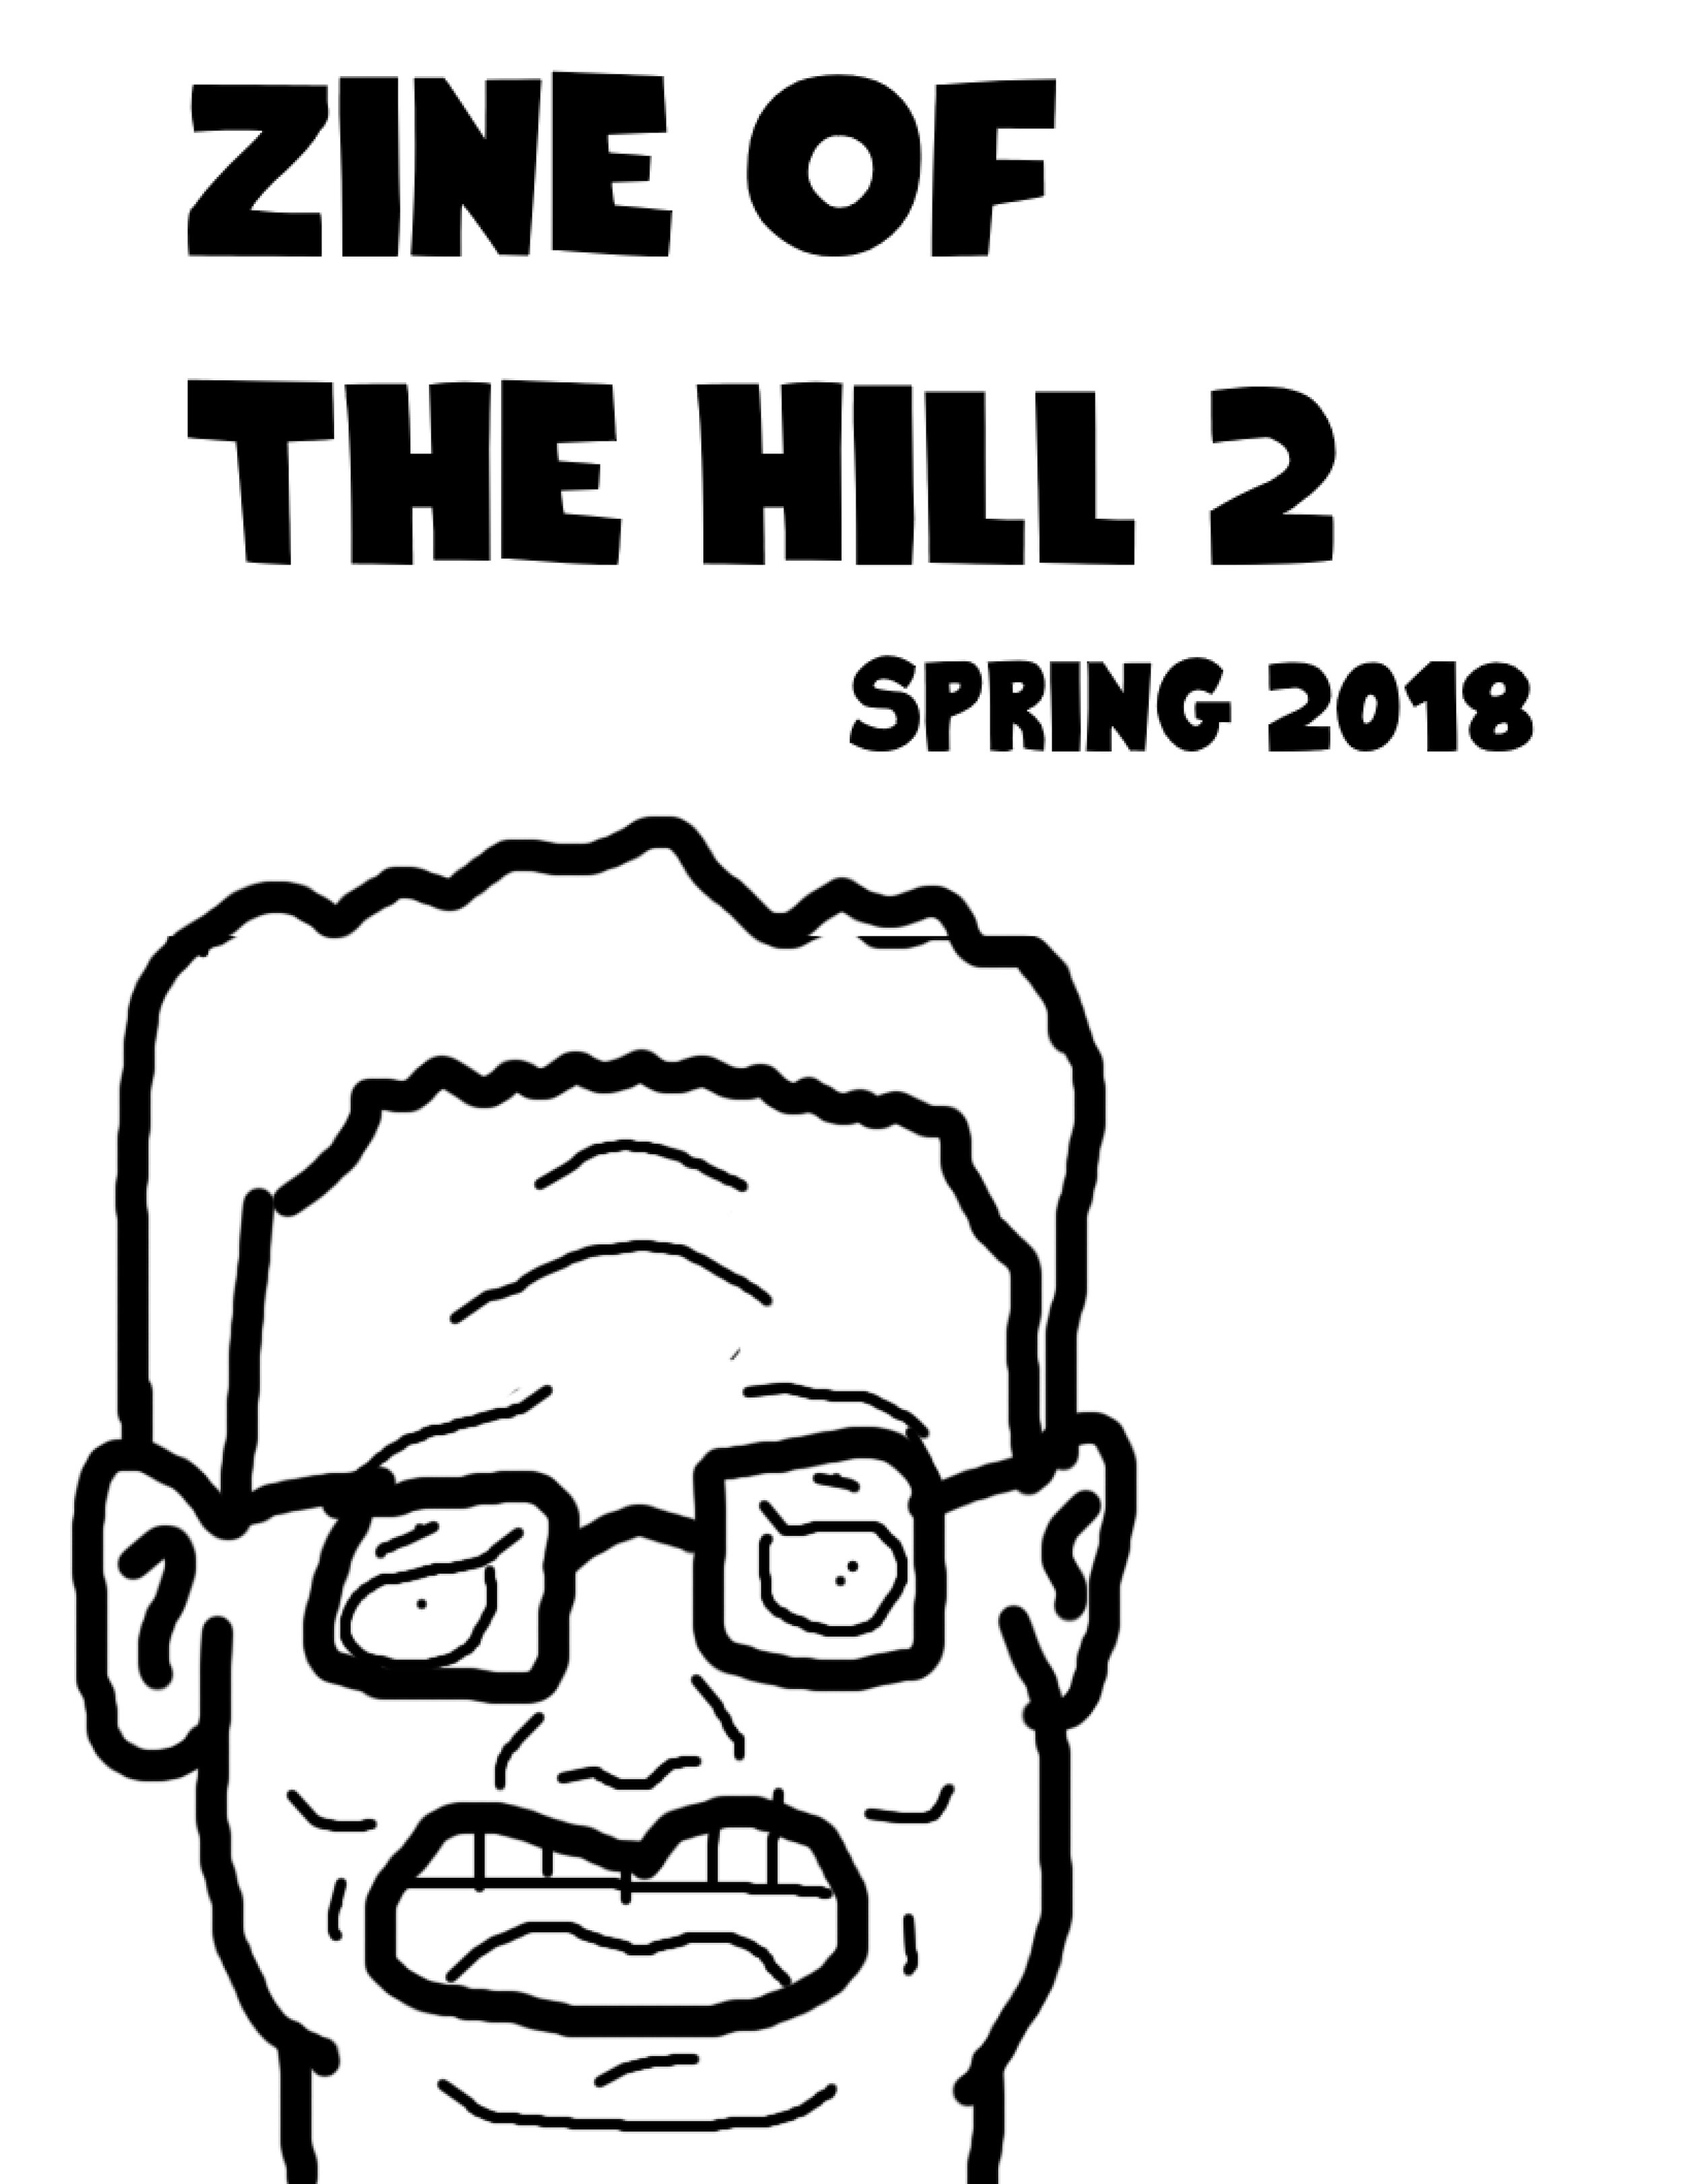 Zine of the Hill 2 by Maira M.